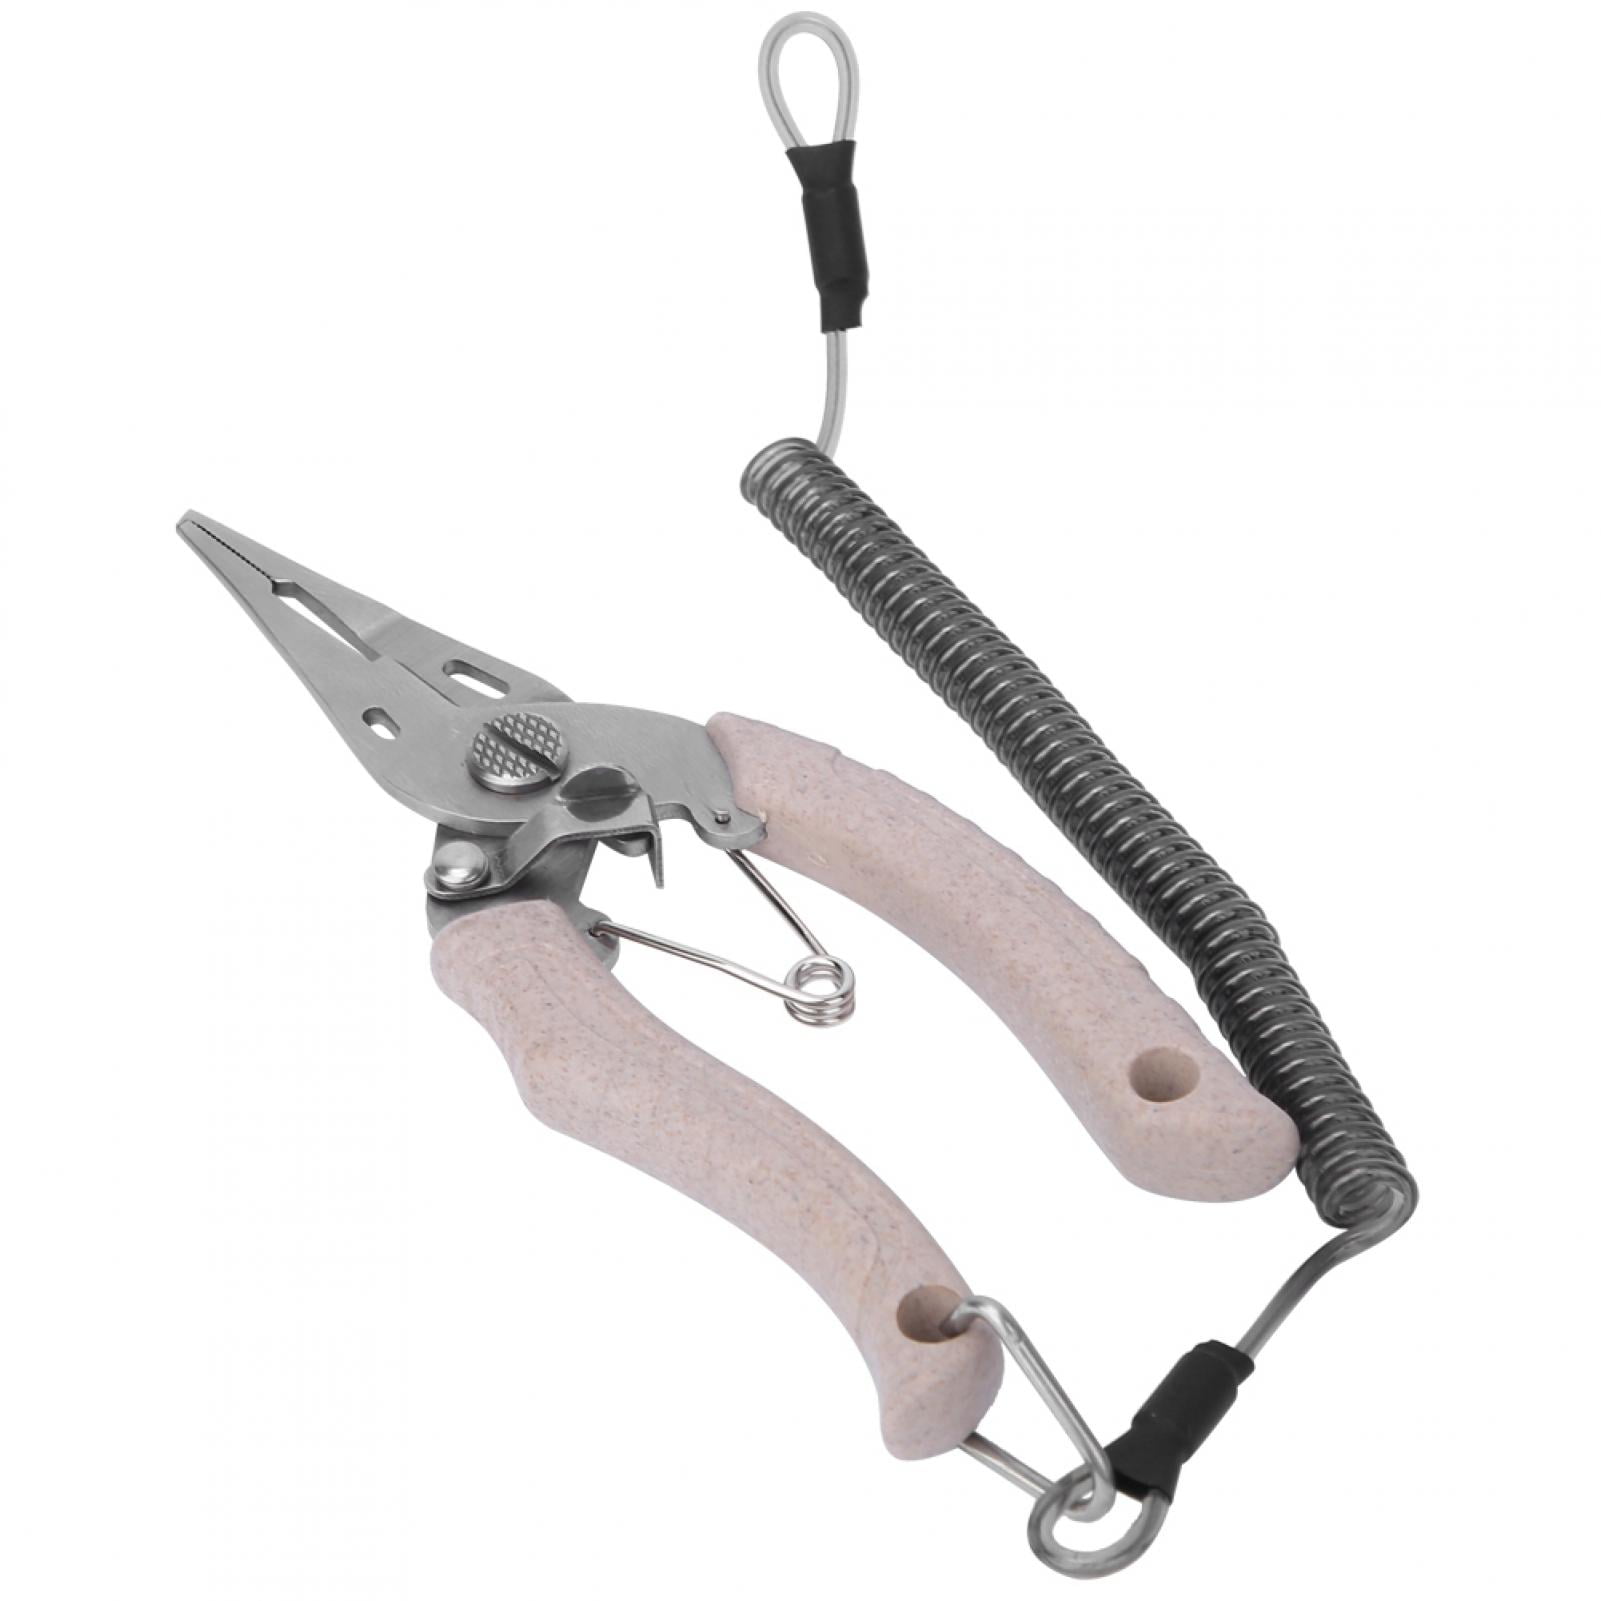 Hot Fishing Pliers Scissors Fly Line Cutter Lure Fishing Accessories Gadget 